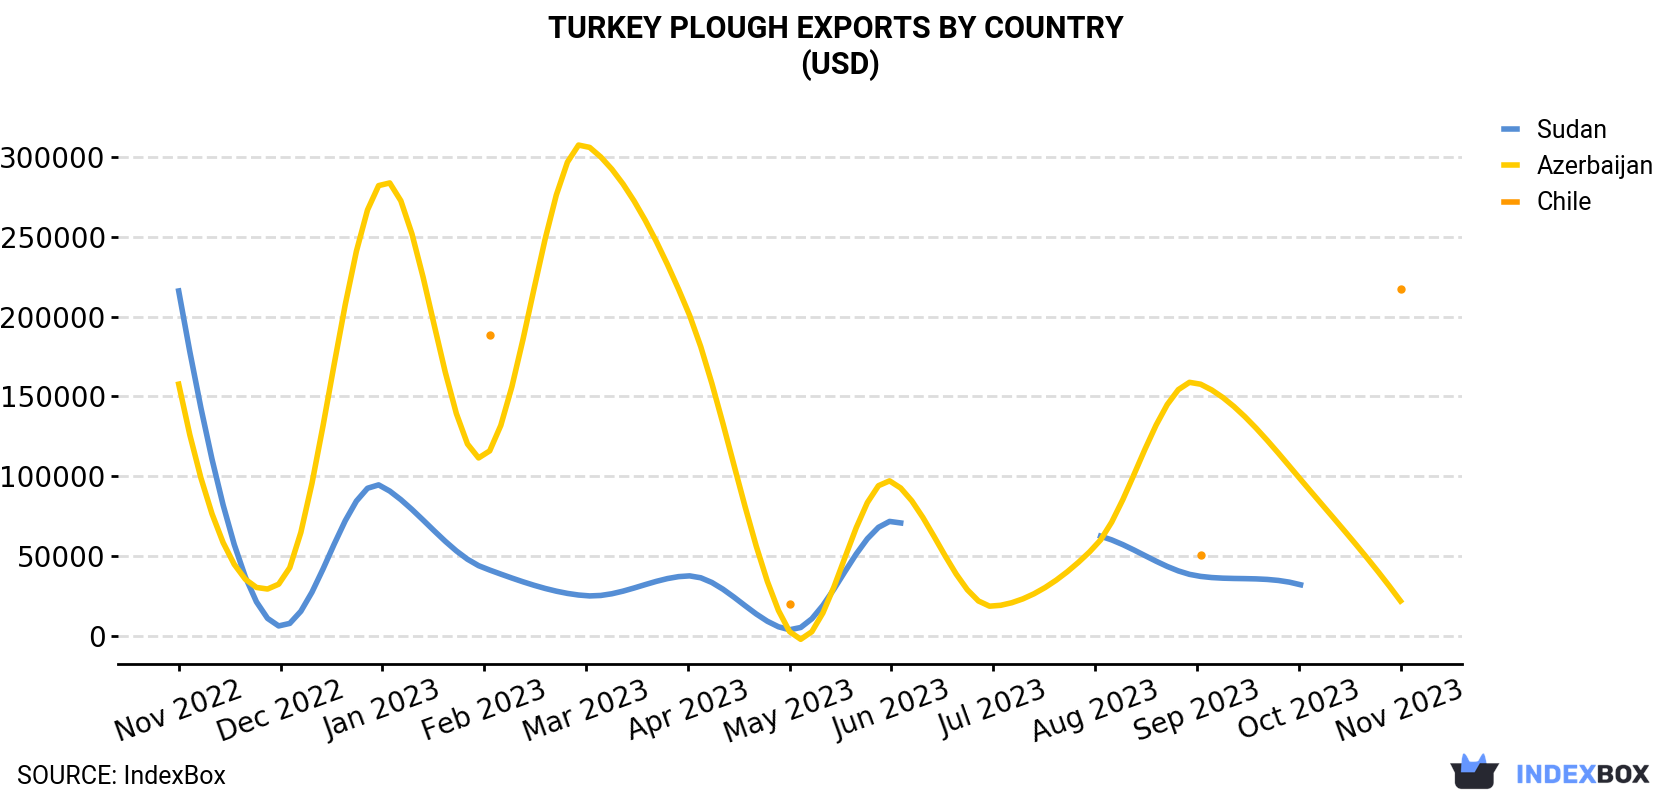 Turkey Plough Exports By Country (USD)